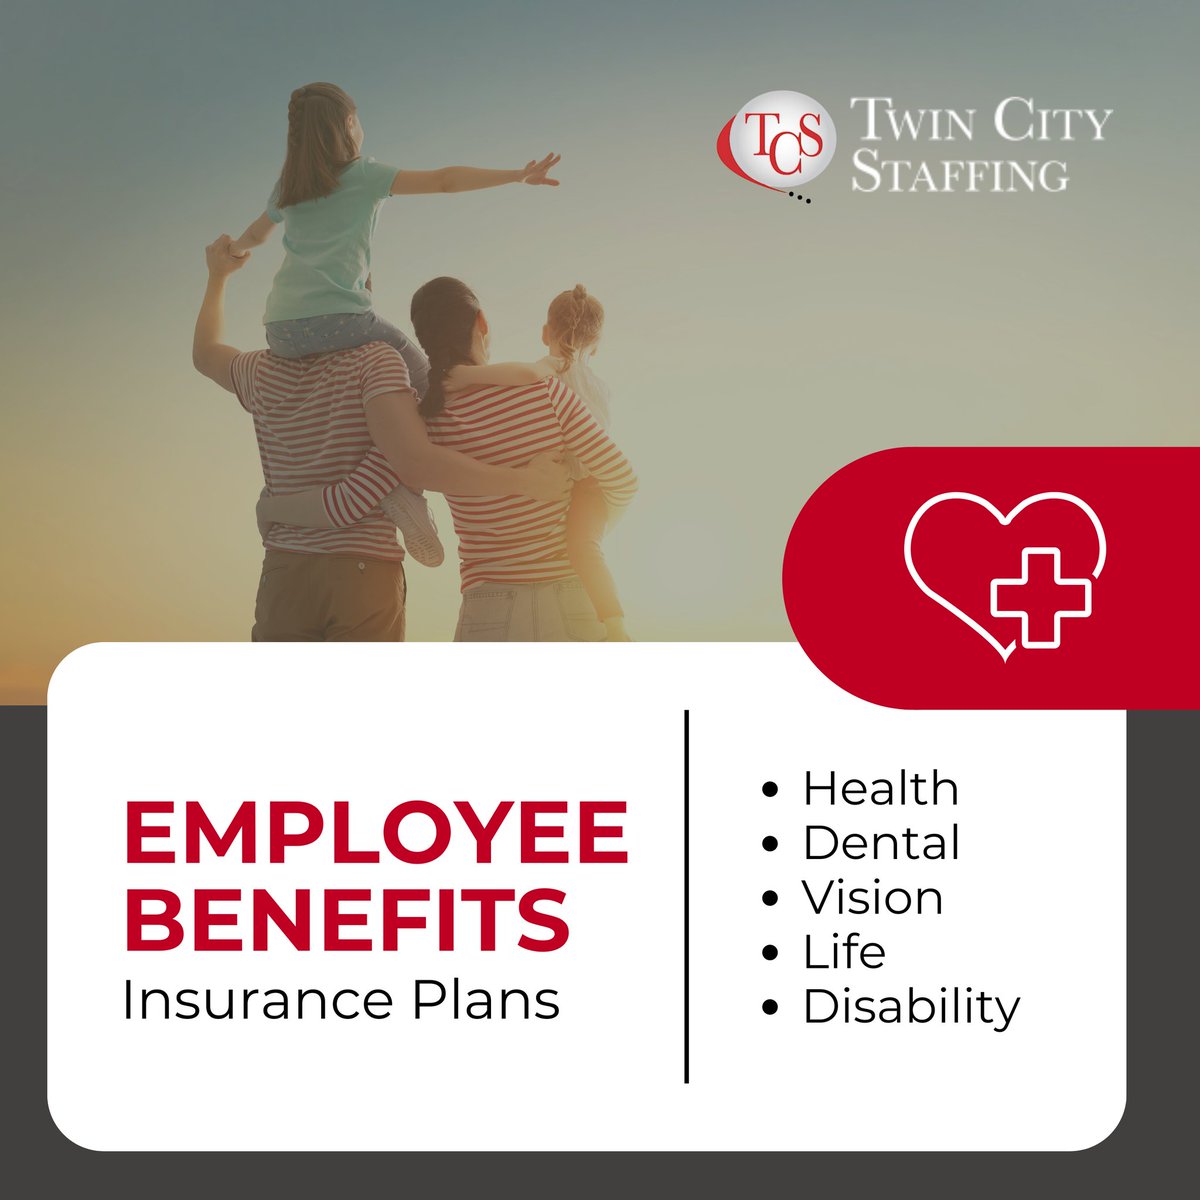 Your well-being matters to us!  Visit our website or reach out to us today!

ow.ly/PQS950QsvaH

#TwinCityStaffing #EmployeeWellbeing #InsuranceOptions #HealthCoverage #DentalInsurance #VisionCare #LifeInsurance #DisabilityCoverage